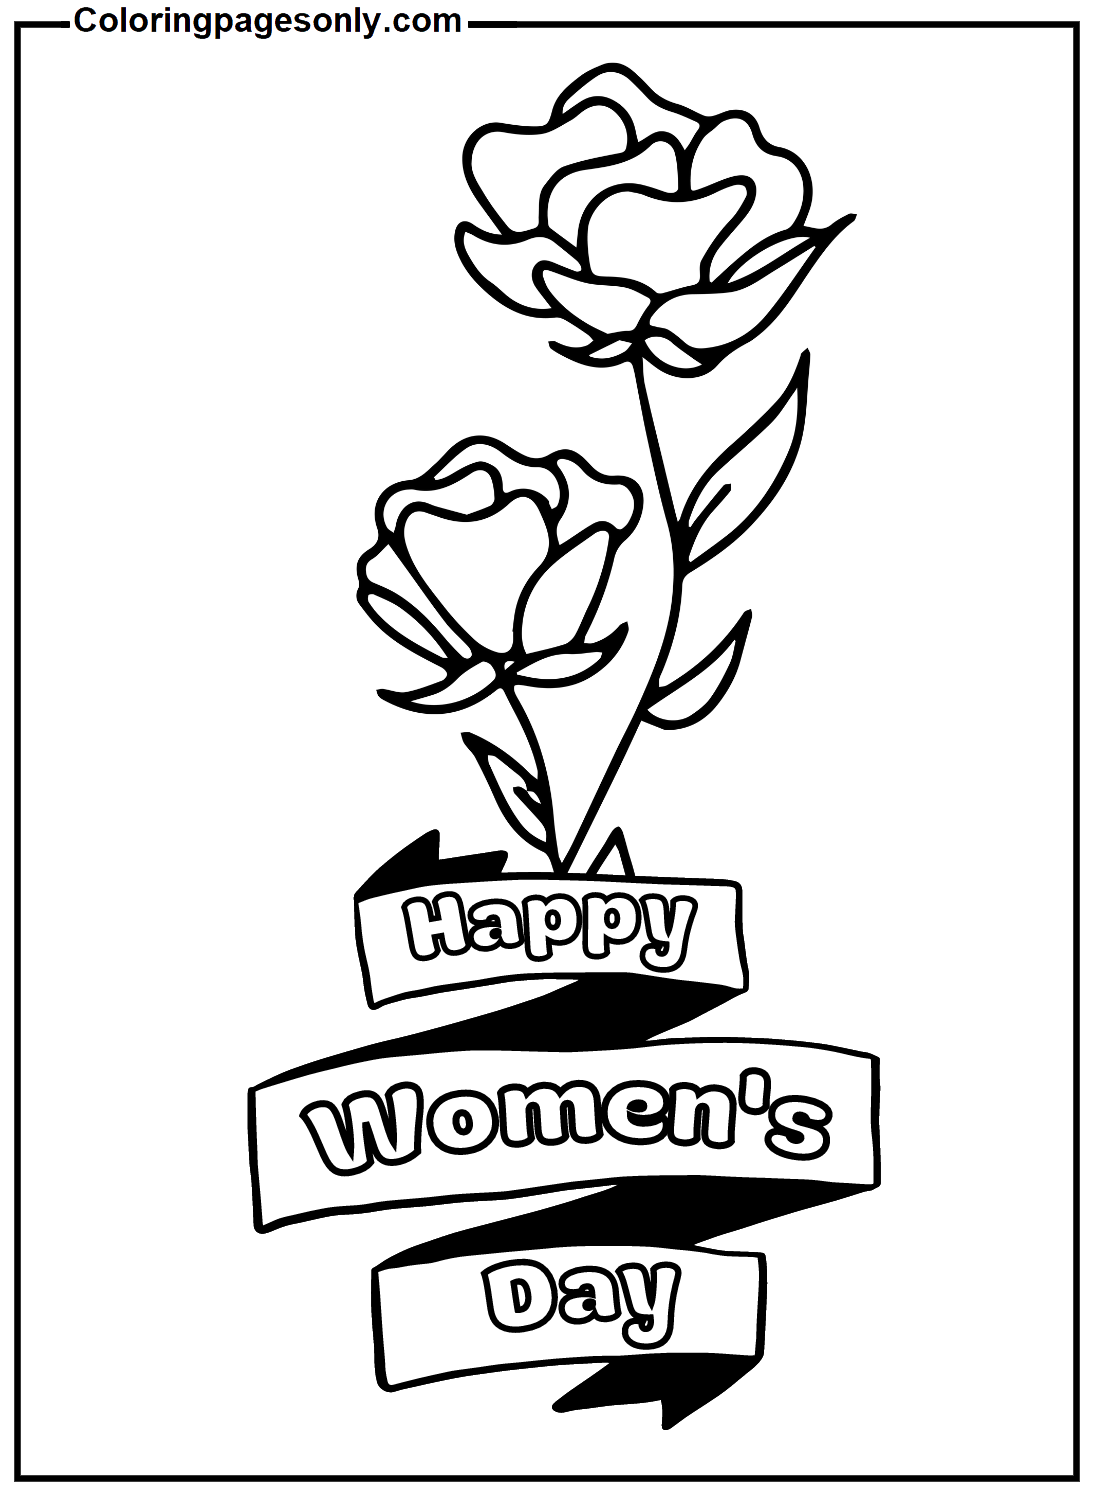 Happy Women’s Day With Roses Coloring Page